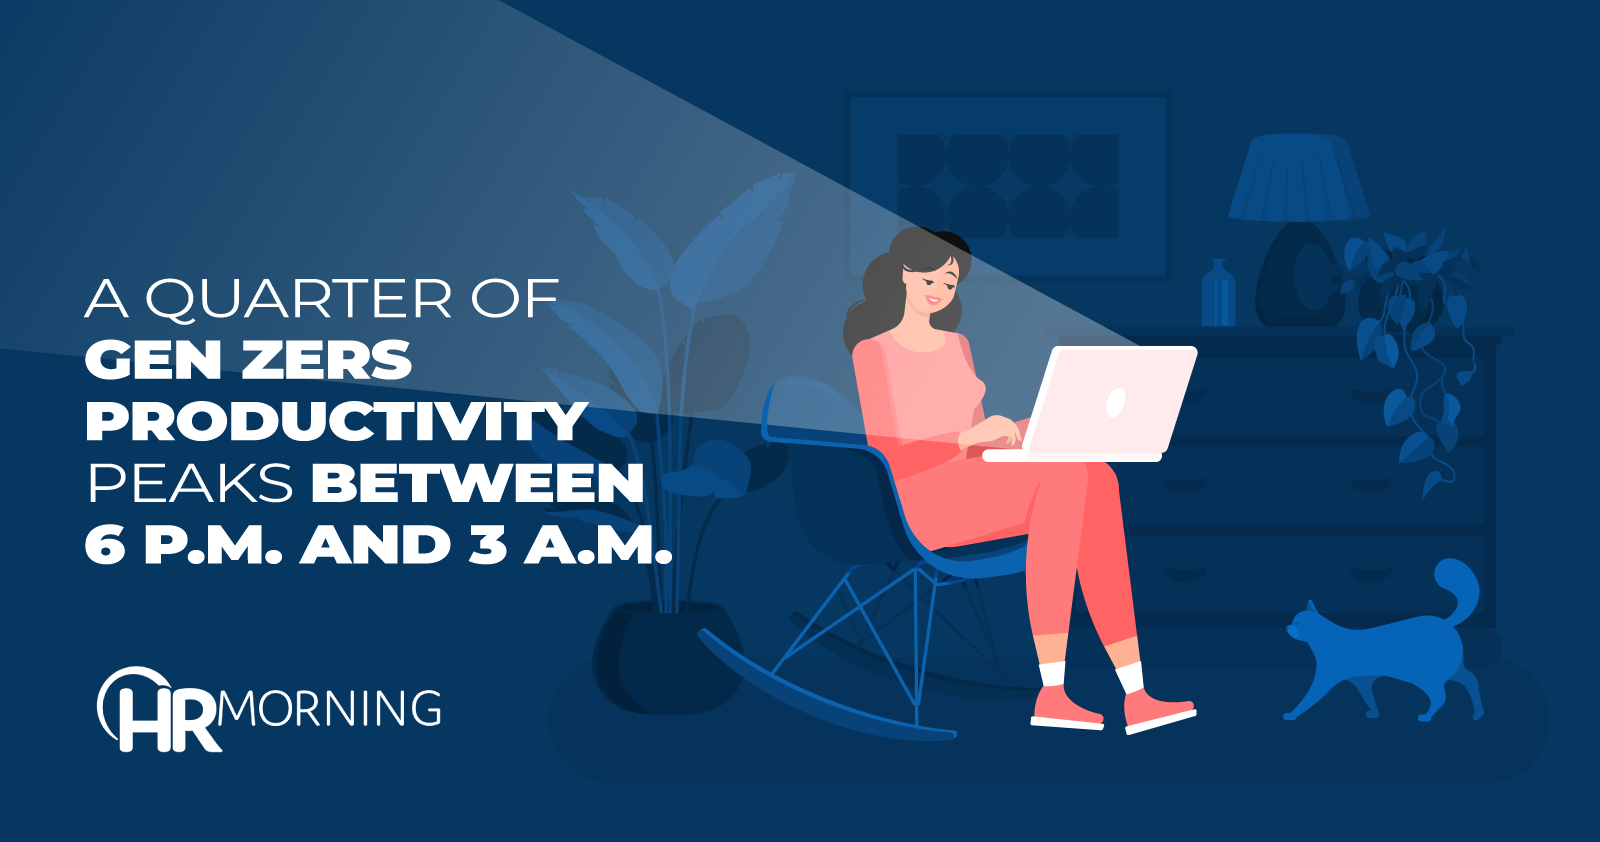 A quarter of Gen Zers productivity peaks between 6 p.m. and 3 a.m.